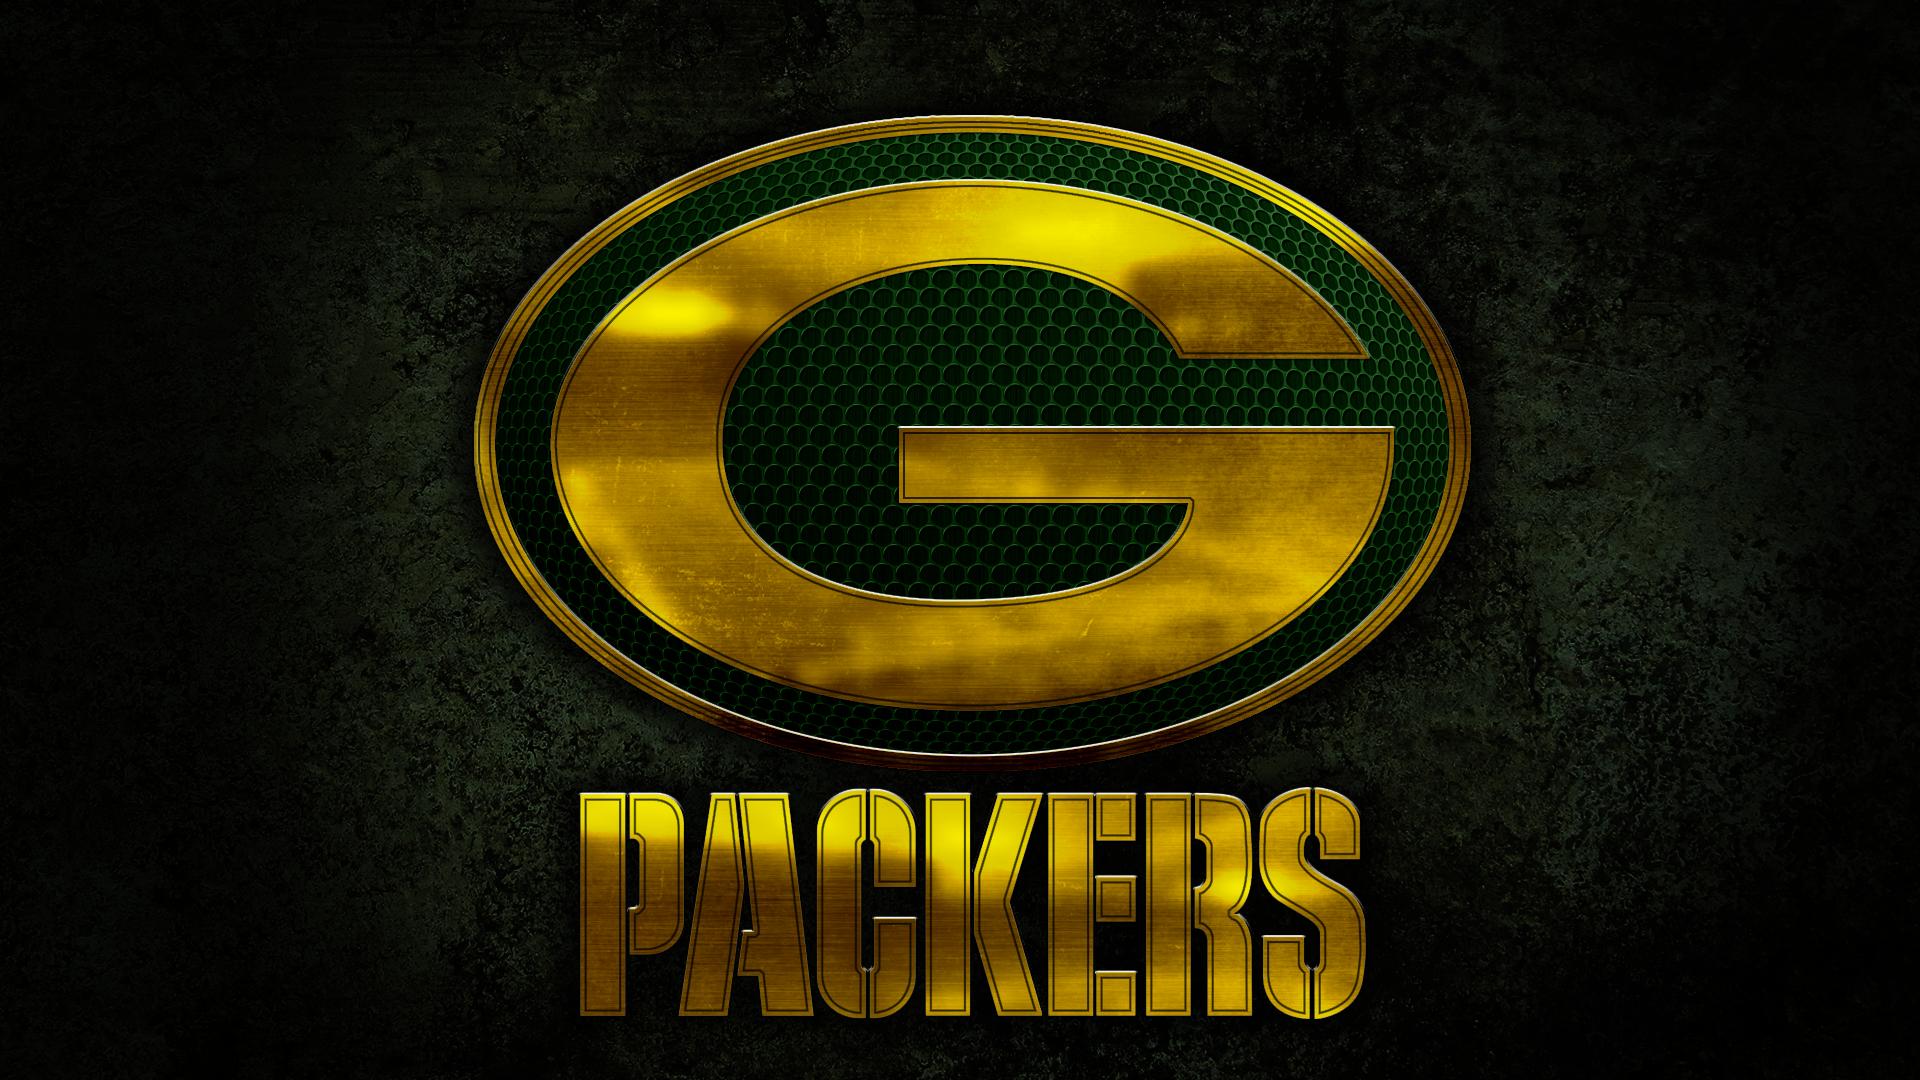 Nice Images Collection: Green Bay Packers  Desktop Wallpapers